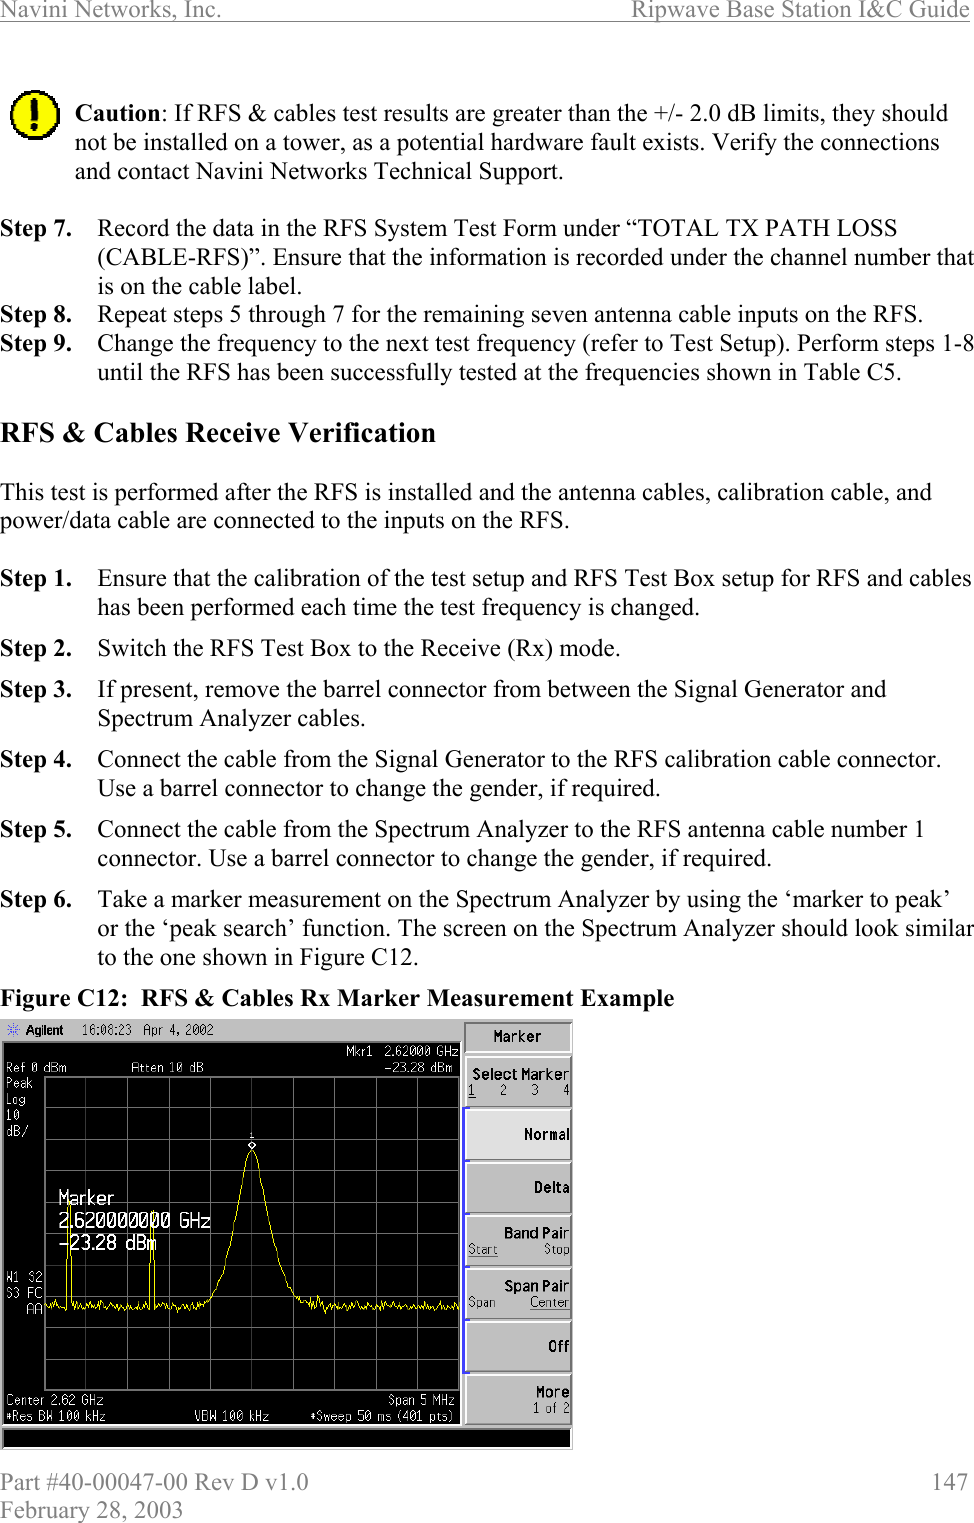 Navini Networks, Inc.                          Ripwave Base Station I&amp;C Guide Part #40-00047-00 Rev D v1.0                     147 February 28, 2003  Caution: If RFS &amp; cables test results are greater than the +/- 2.0 dB limits, they should not be installed on a tower, as a potential hardware fault exists. Verify the connections and contact Navini Networks Technical Support.  Step 7.  Record the data in the RFS System Test Form under “TOTAL TX PATH LOSS (CABLE-RFS)”. Ensure that the information is recorded under the channel number that is on the cable label. Step 8.  Repeat steps 5 through 7 for the remaining seven antenna cable inputs on the RFS. Step 9.  Change the frequency to the next test frequency (refer to Test Setup). Perform steps 1-8 until the RFS has been successfully tested at the frequencies shown in Table C5.  RFS &amp; Cables Receive Verification  This test is performed after the RFS is installed and the antenna cables, calibration cable, and power/data cable are connected to the inputs on the RFS.   Step 1.  Ensure that the calibration of the test setup and RFS Test Box setup for RFS and cables has been performed each time the test frequency is changed. Step 2.  Switch the RFS Test Box to the Receive (Rx) mode. Step 3.  If present, remove the barrel connector from between the Signal Generator and Spectrum Analyzer cables. Step 4.  Connect the cable from the Signal Generator to the RFS calibration cable connector. Use a barrel connector to change the gender, if required. Step 5.  Connect the cable from the Spectrum Analyzer to the RFS antenna cable number 1 connector. Use a barrel connector to change the gender, if required. Step 6.  Take a marker measurement on the Spectrum Analyzer by using the ‘marker to peak’ or the ‘peak search’ function. The screen on the Spectrum Analyzer should look similar to the one shown in Figure C12. Figure C12:  RFS &amp; Cables Rx Marker Measurement Example               